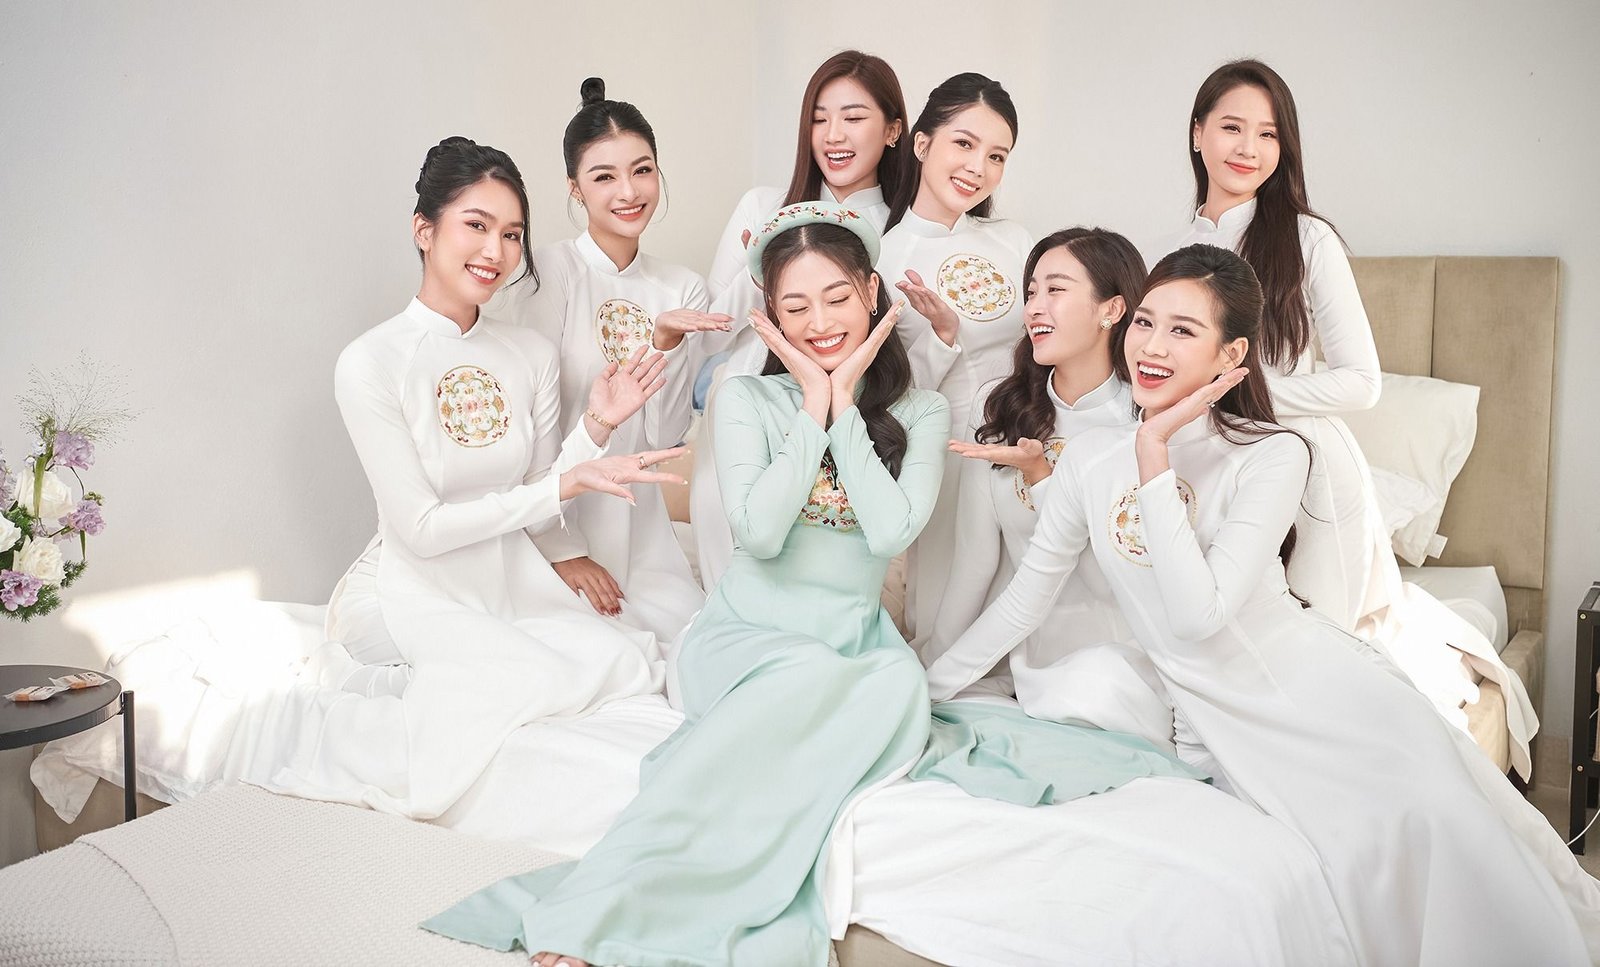 Makeup trends unite the bride and her sisters and aunts at the wedding 1